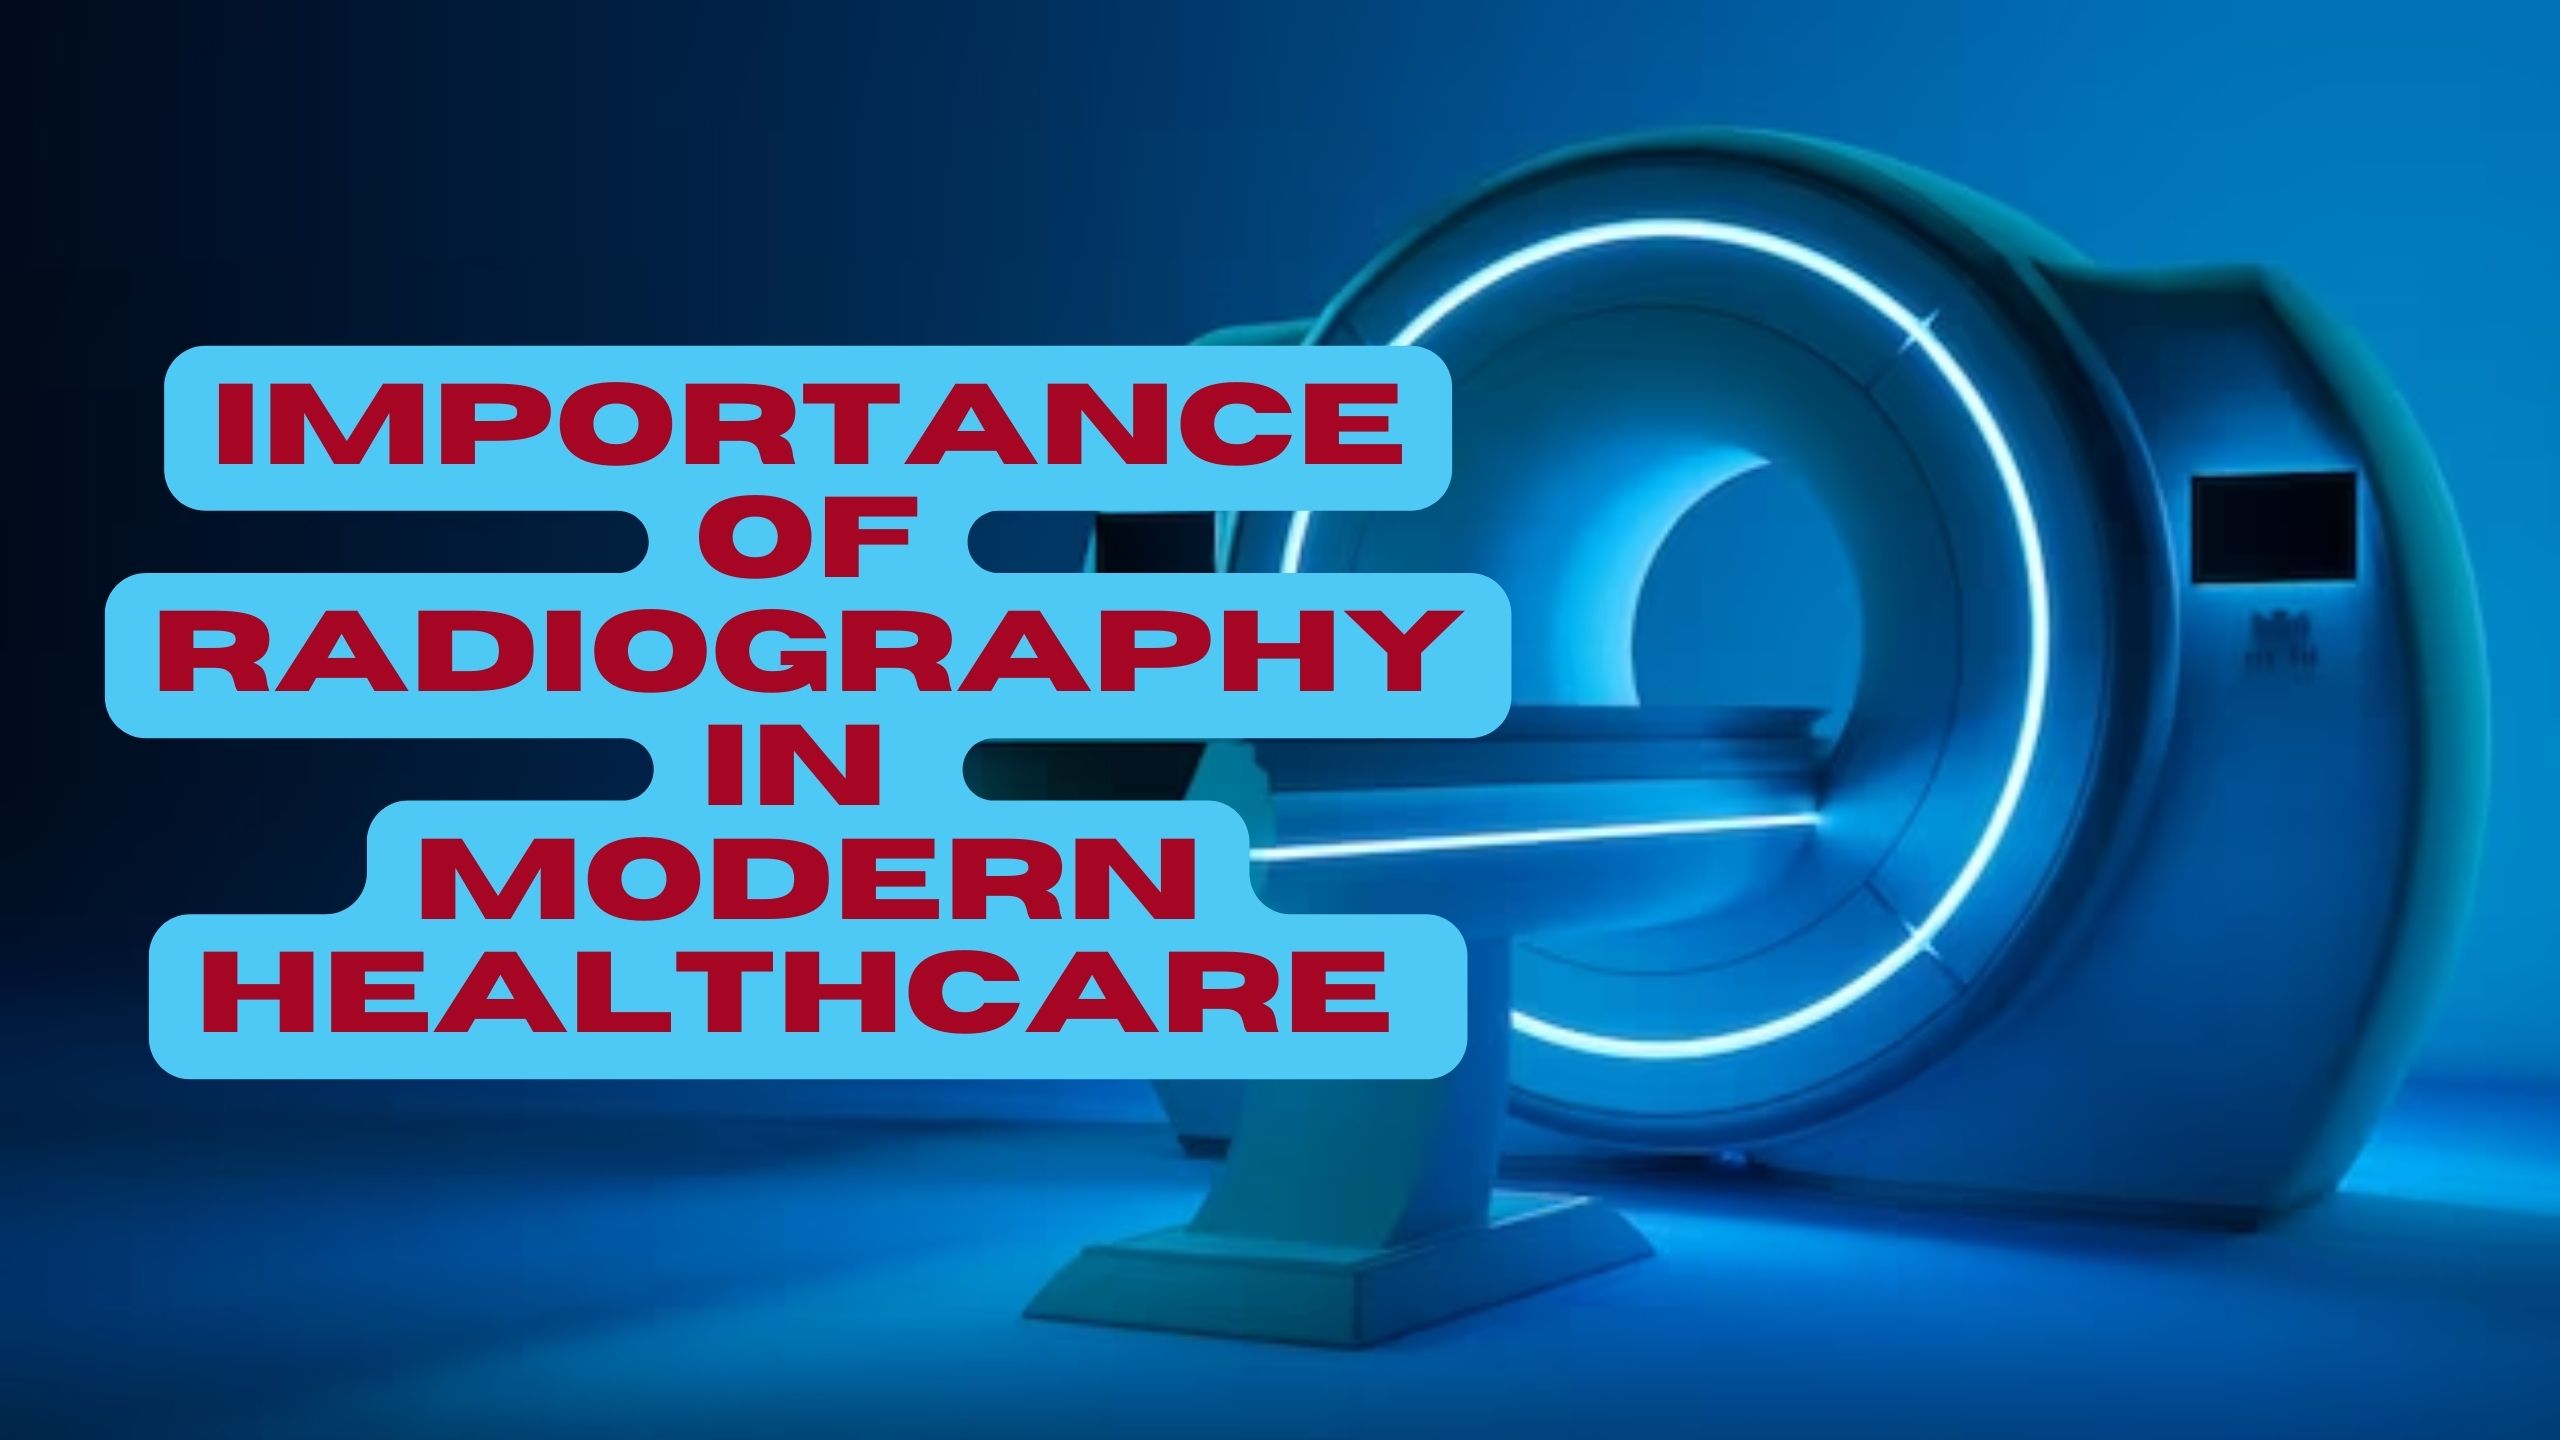 Importance of Radiography in Modern Healthcare 